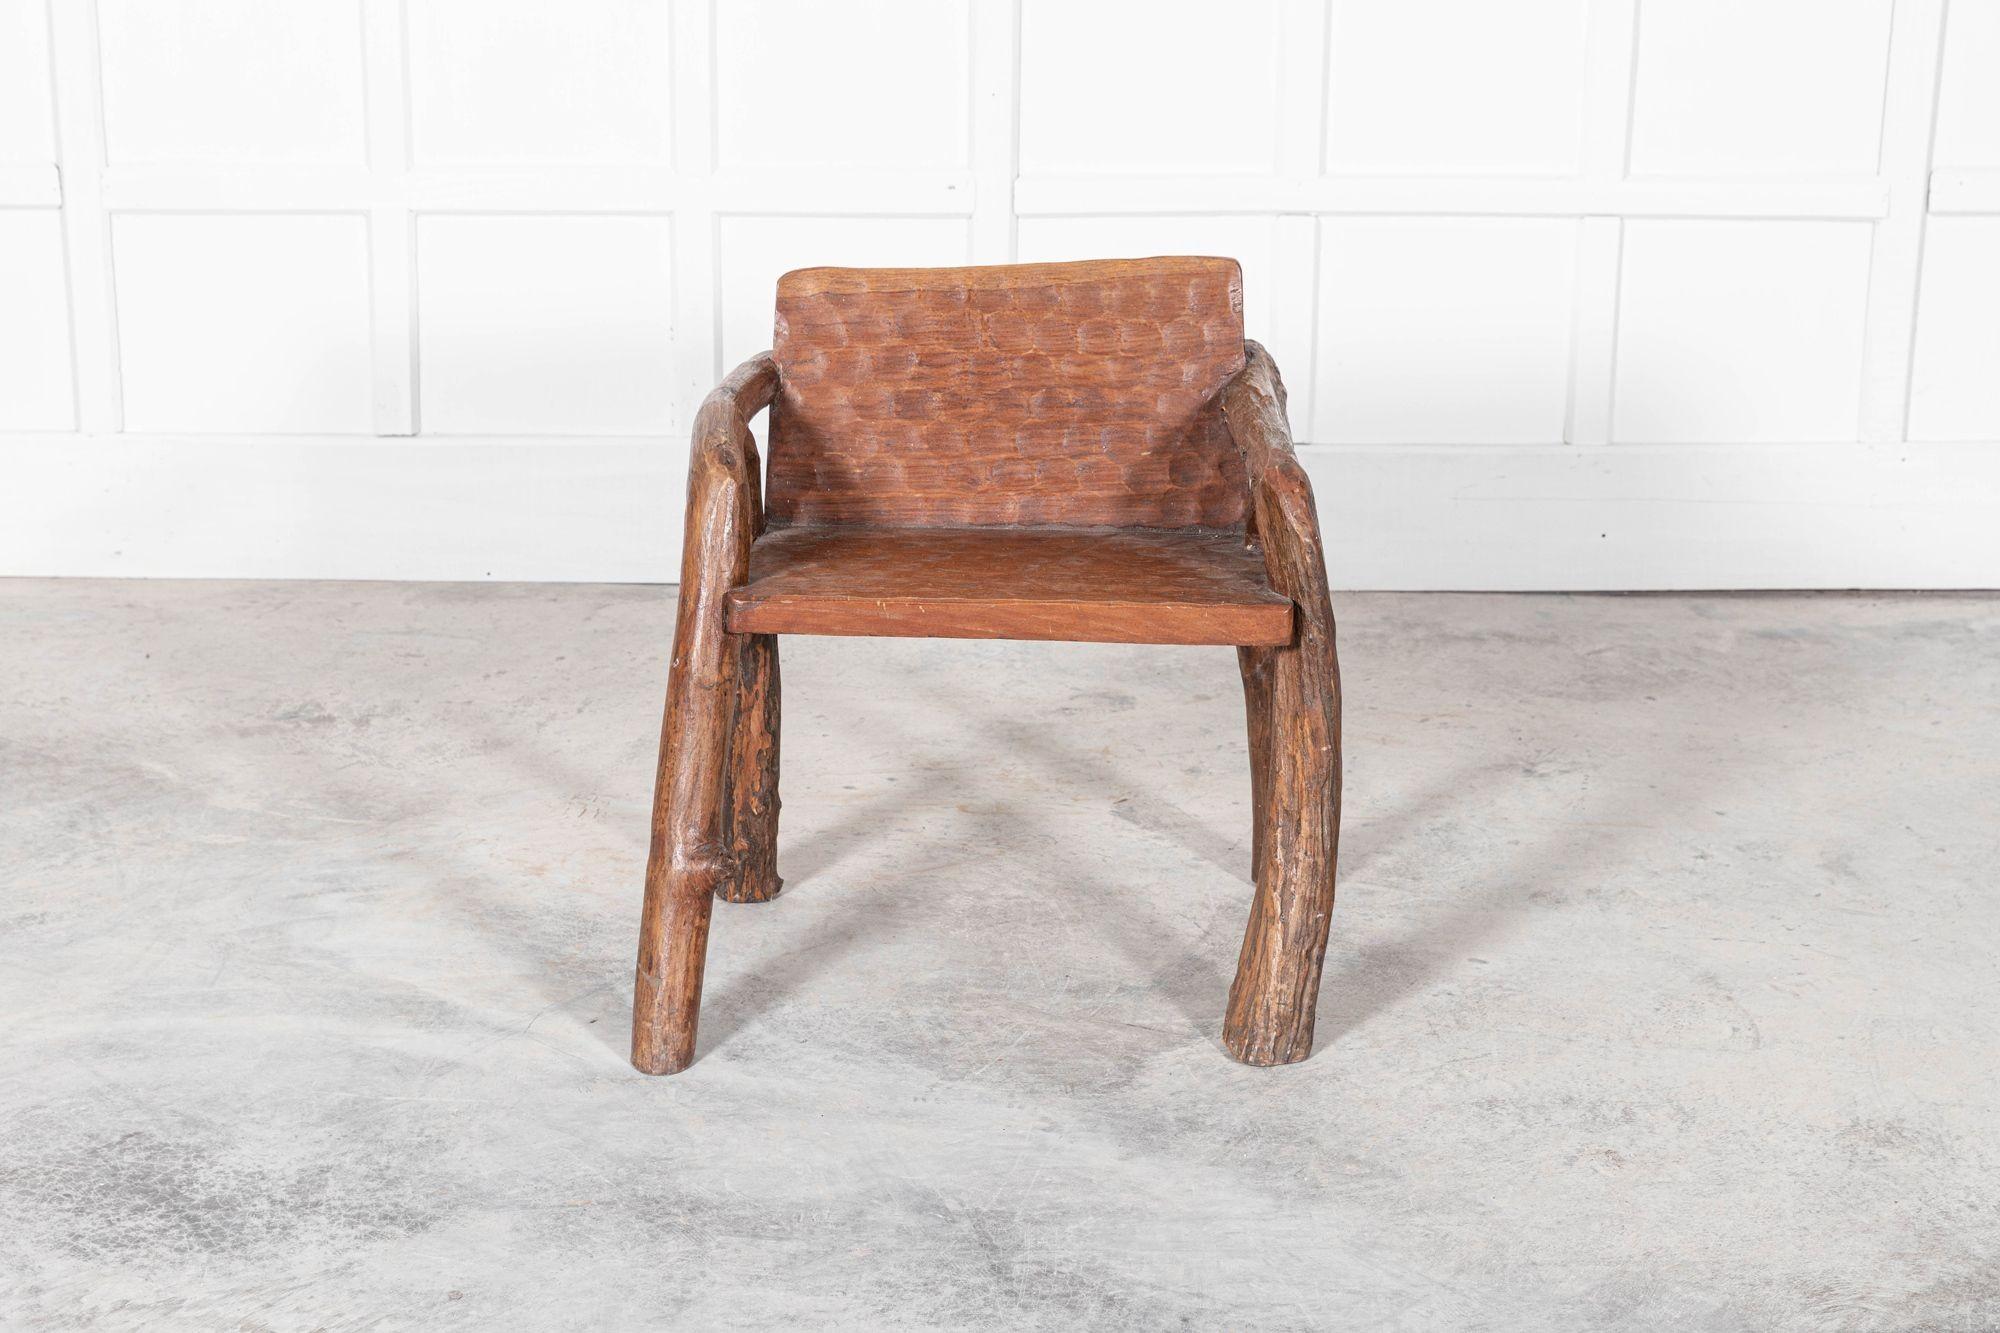 circa 1950
Mid century Provincial French fruitwood root chair
Measures: W 65 x D 45 x H 73cm.
 